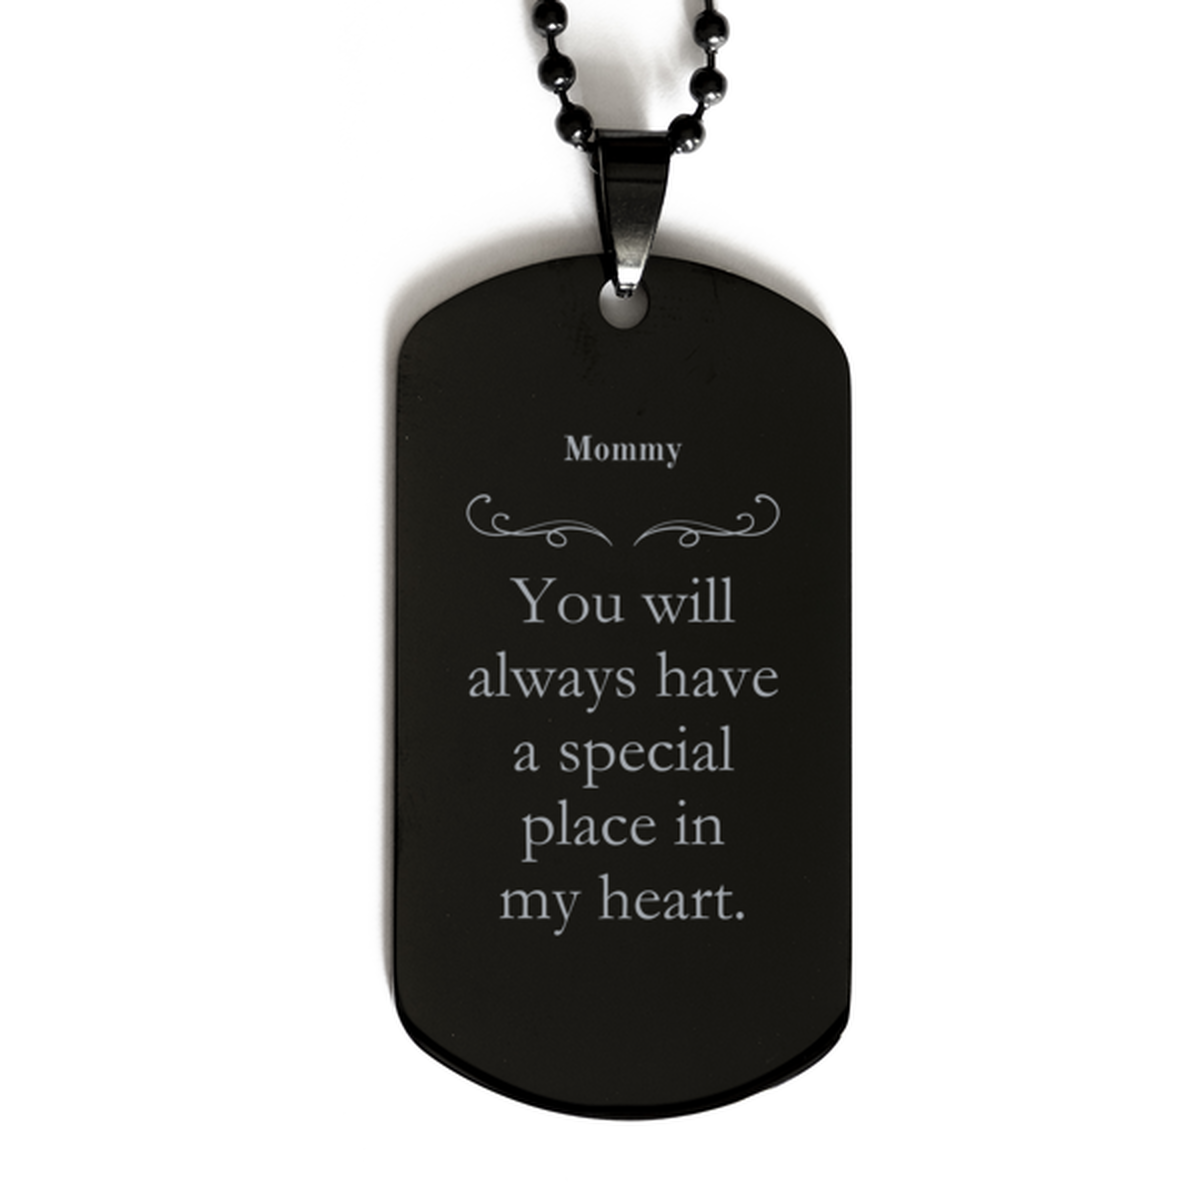 Engraved Black Dog Tag Mommy Gift for Birthday Christmas Veterans Day - You will always have a special place in my heart - Meaningful Jewelry for Mommy